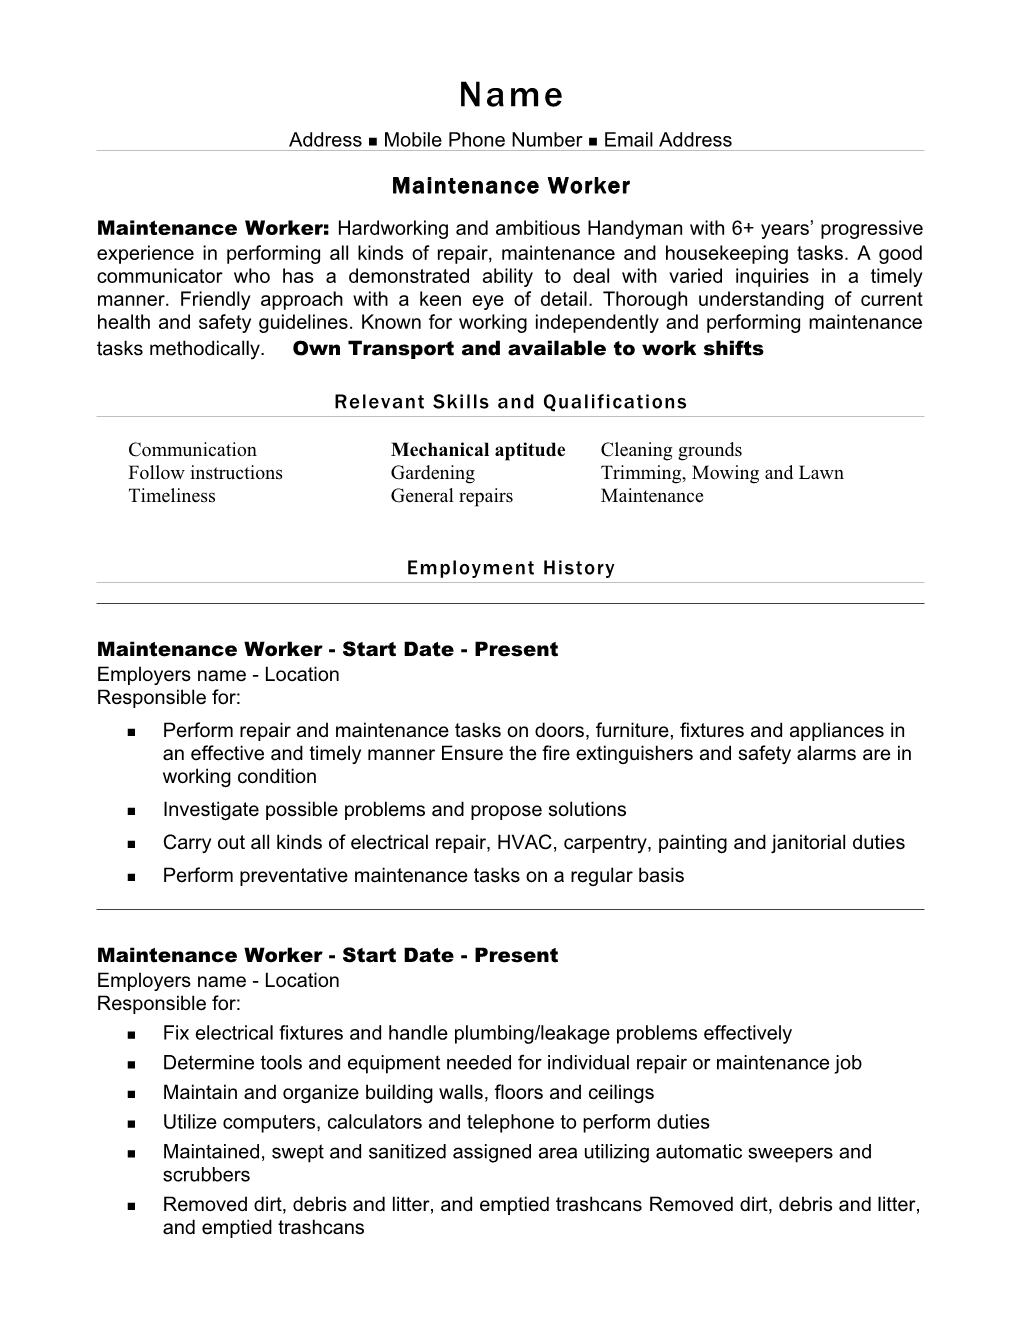 Sample Resume for a Construction/Carpenter's Assistant